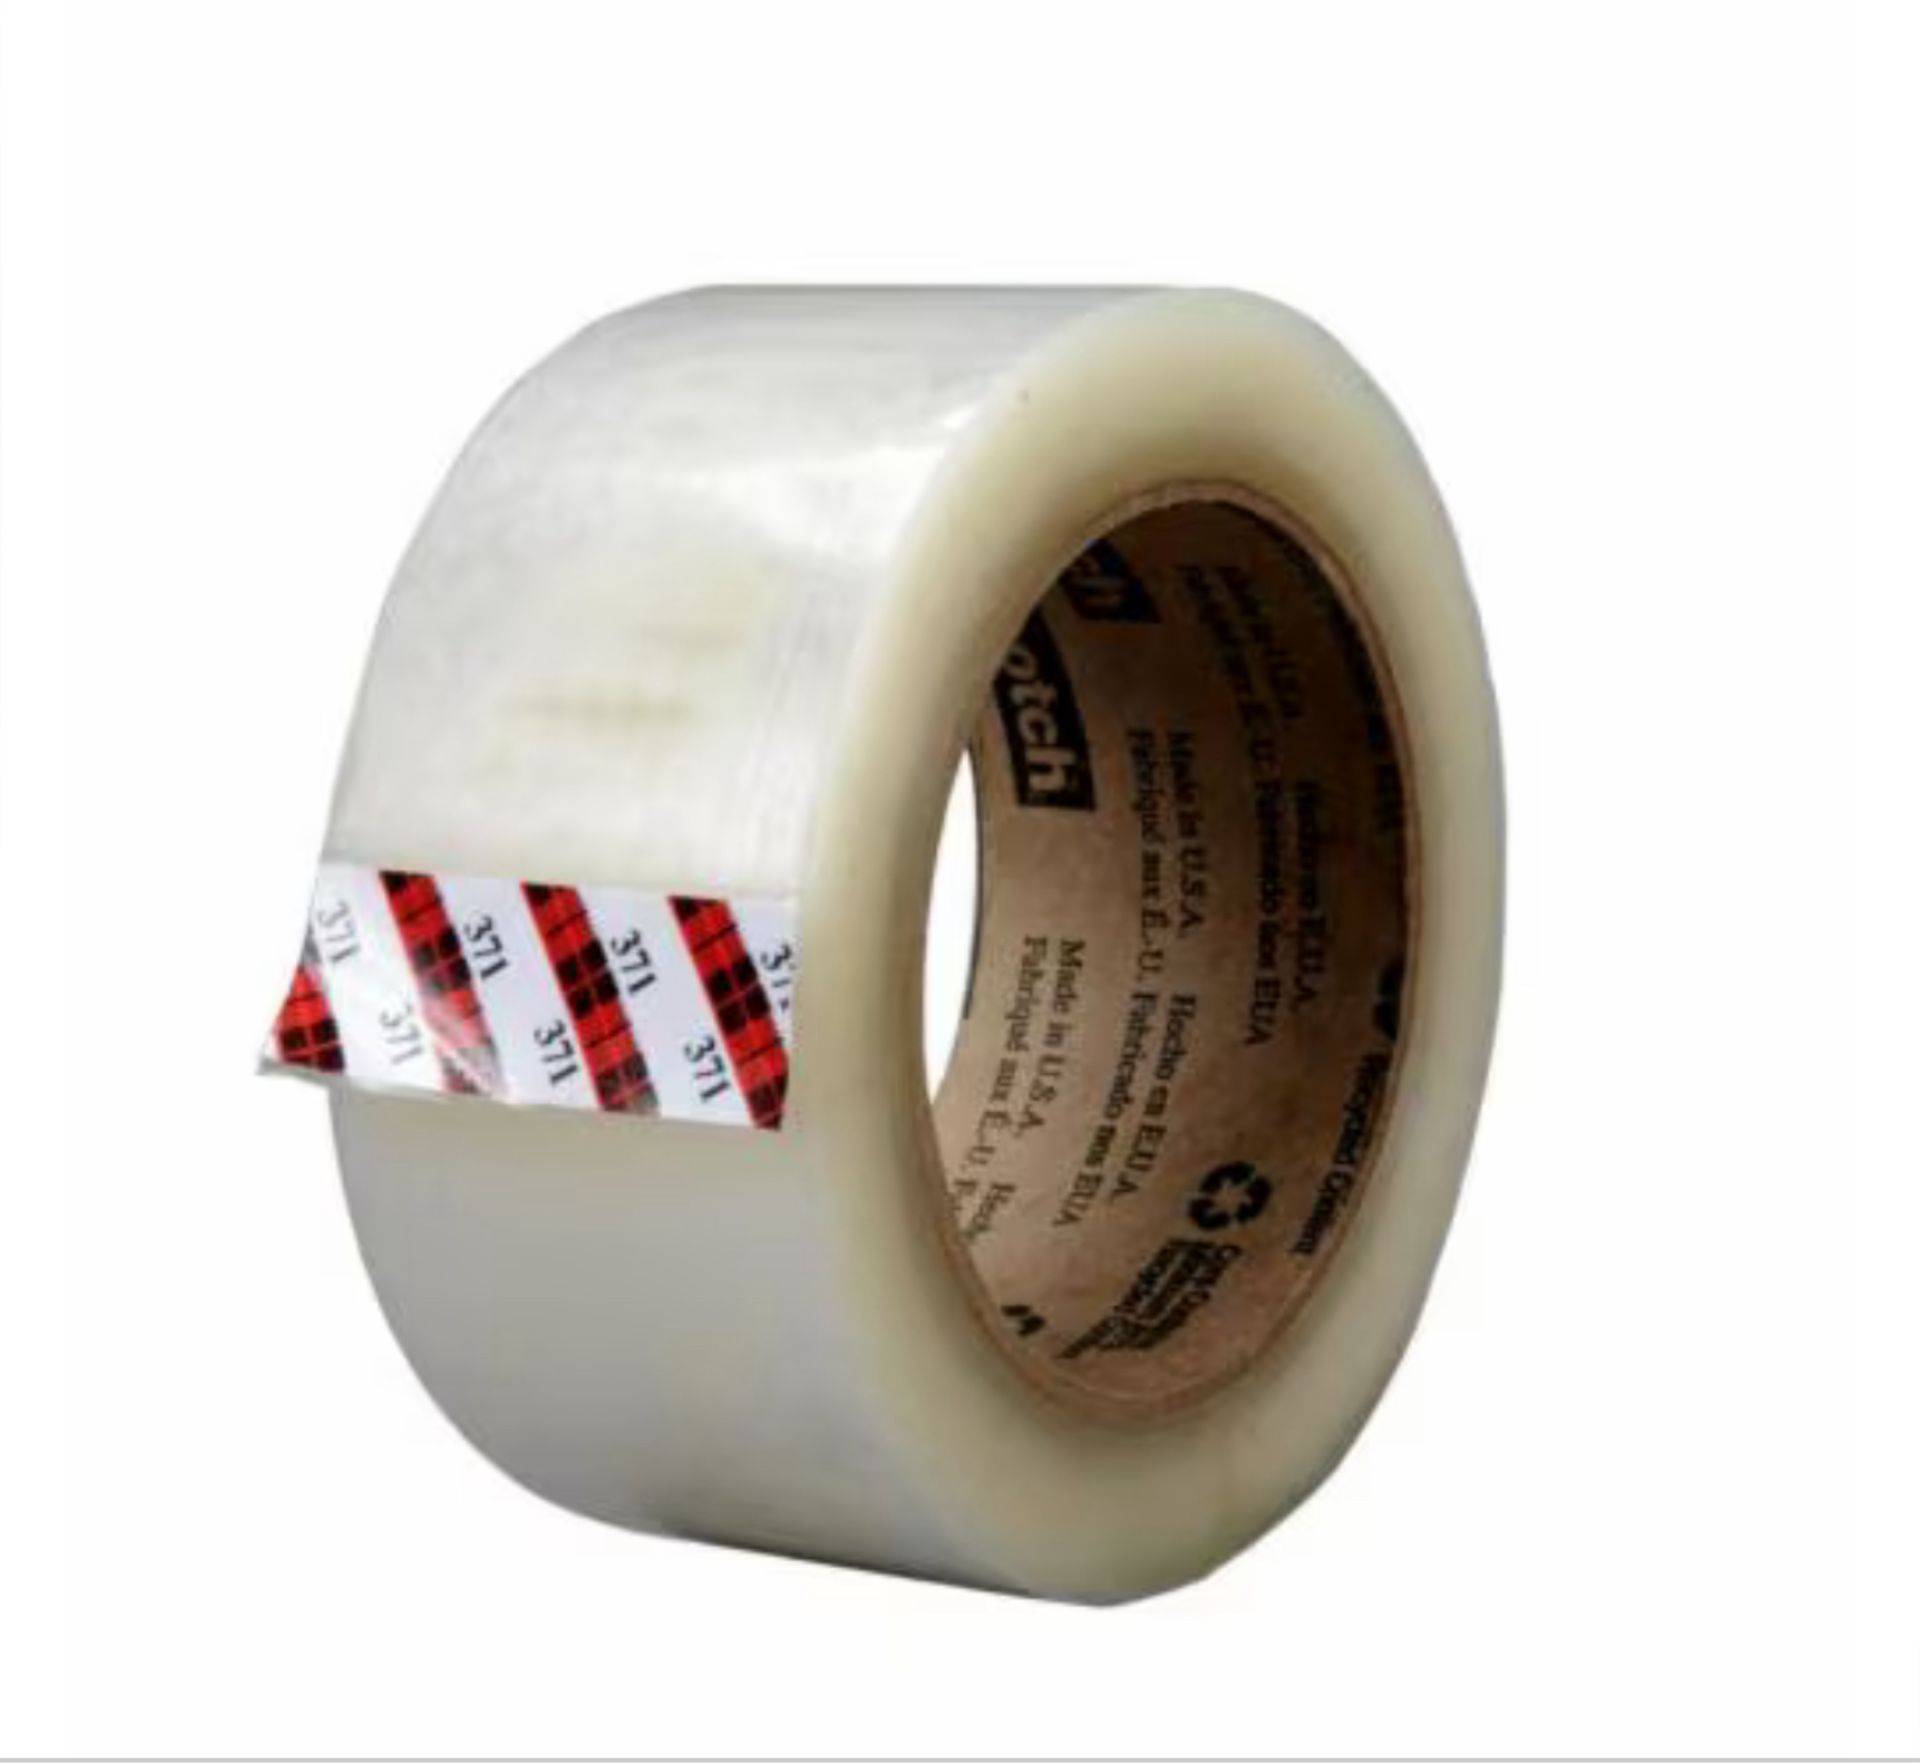 3M Scotch Sealing Tape - Clear - Image 5 of 5